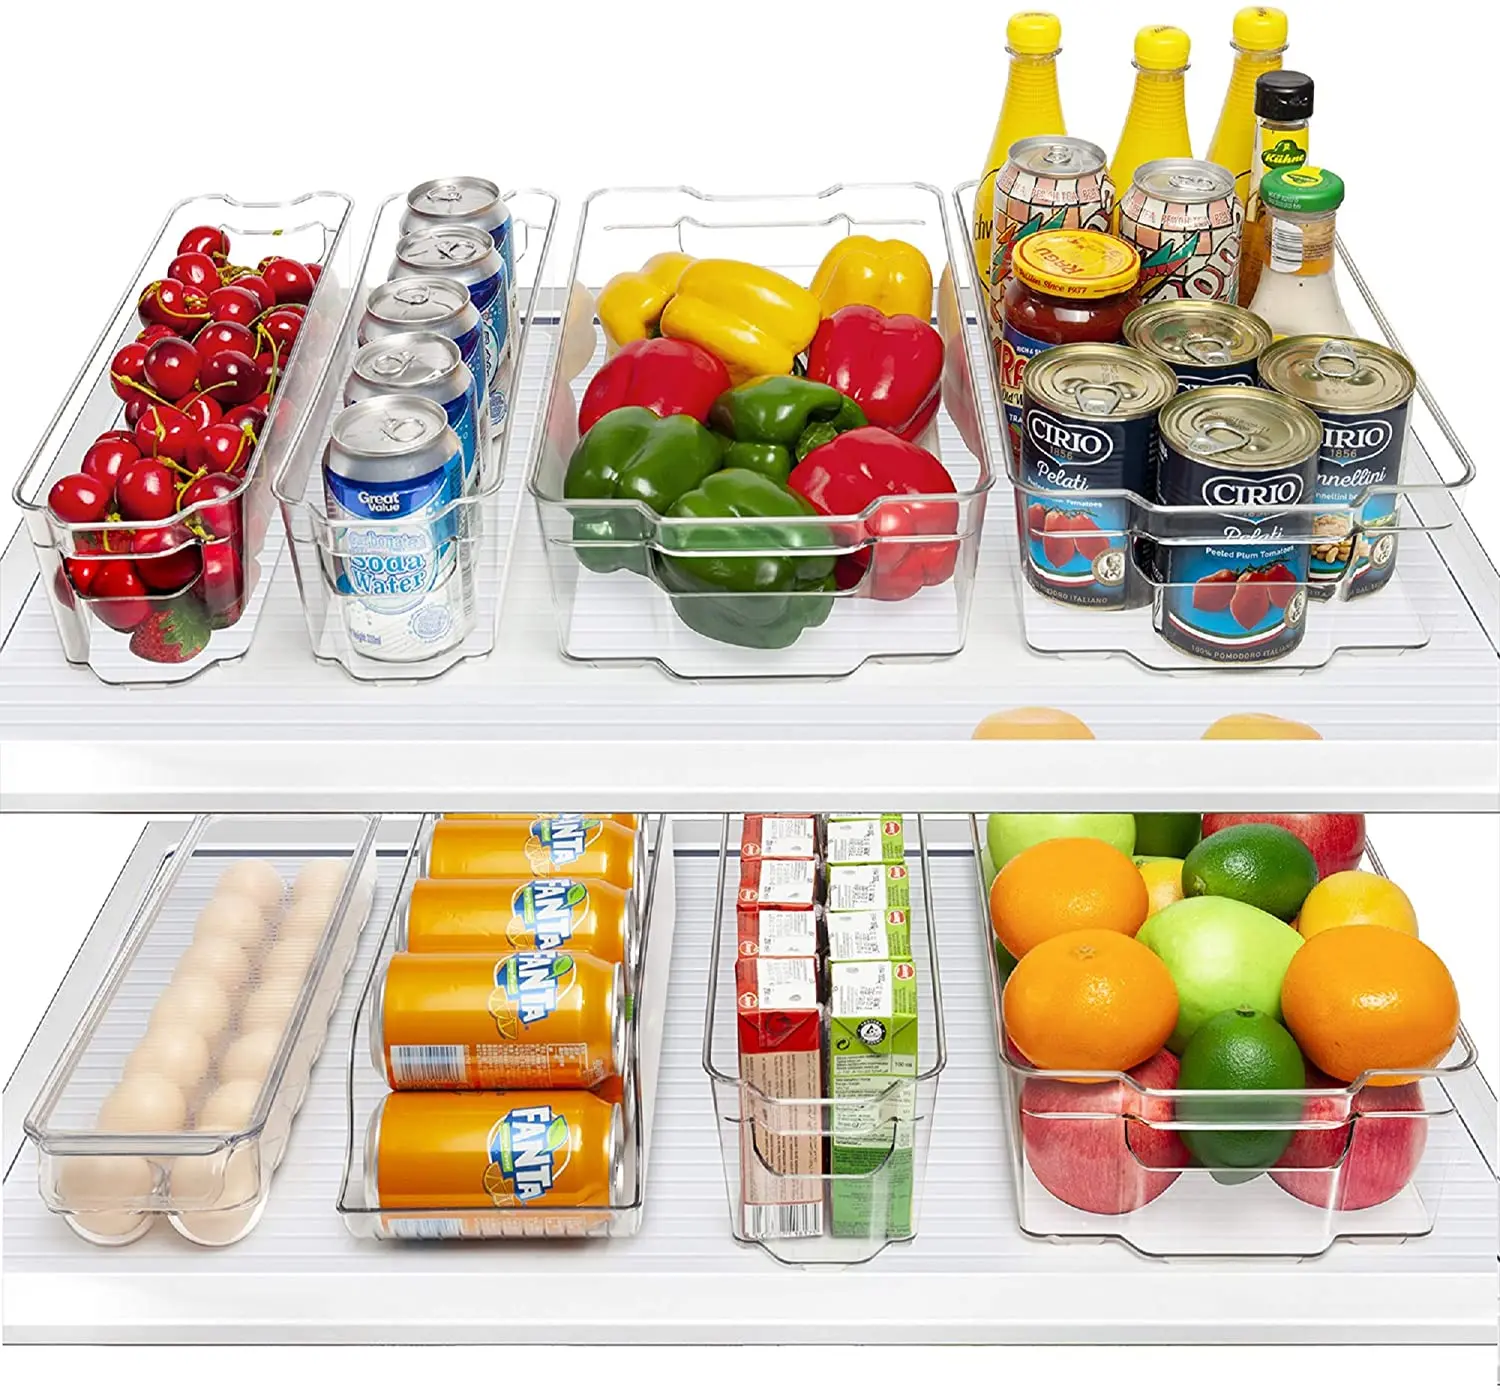 

8 Pieces BPA-Free Clear Plastic Refrigerator Pantry Fridge Organizer Bins Kitchen Cabinets for Freezer and Pantry, Transparent